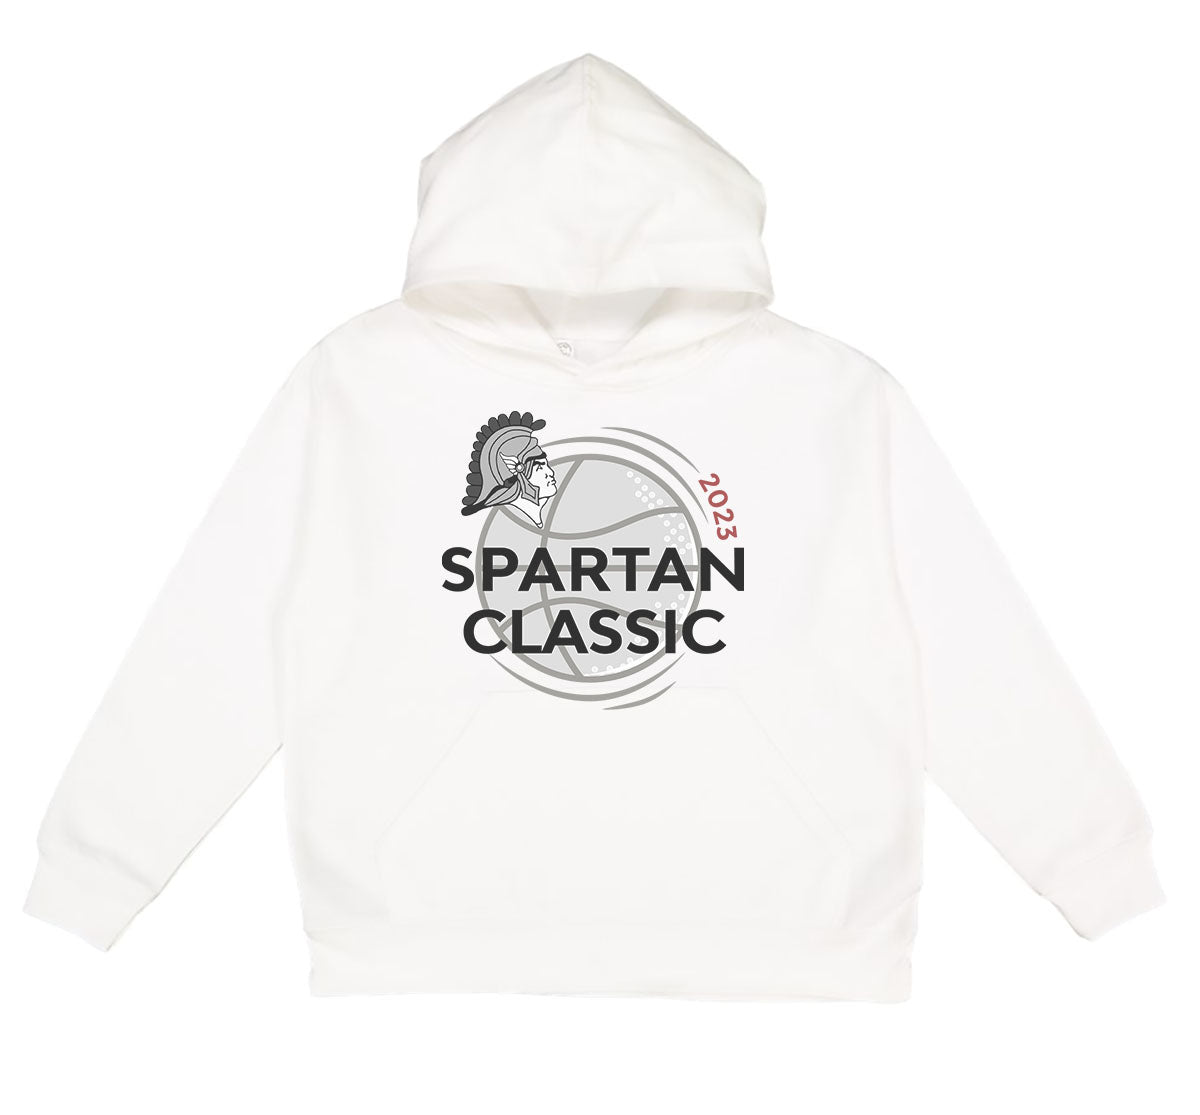 Spartan Classic // Youth Hoodie